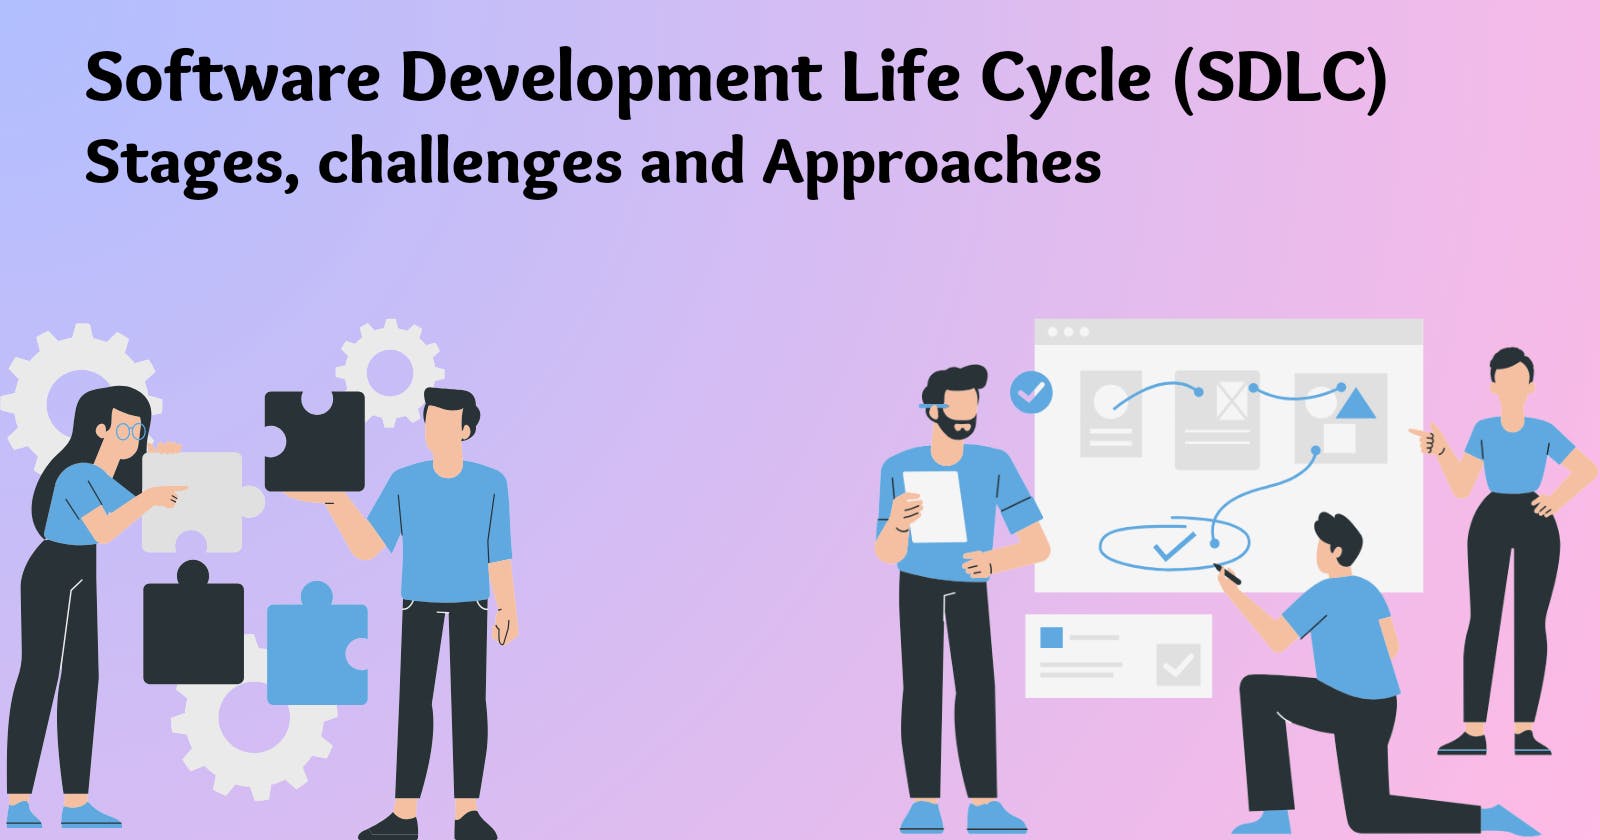 Software Development Life Cycle: Stages, Challenges and approaches